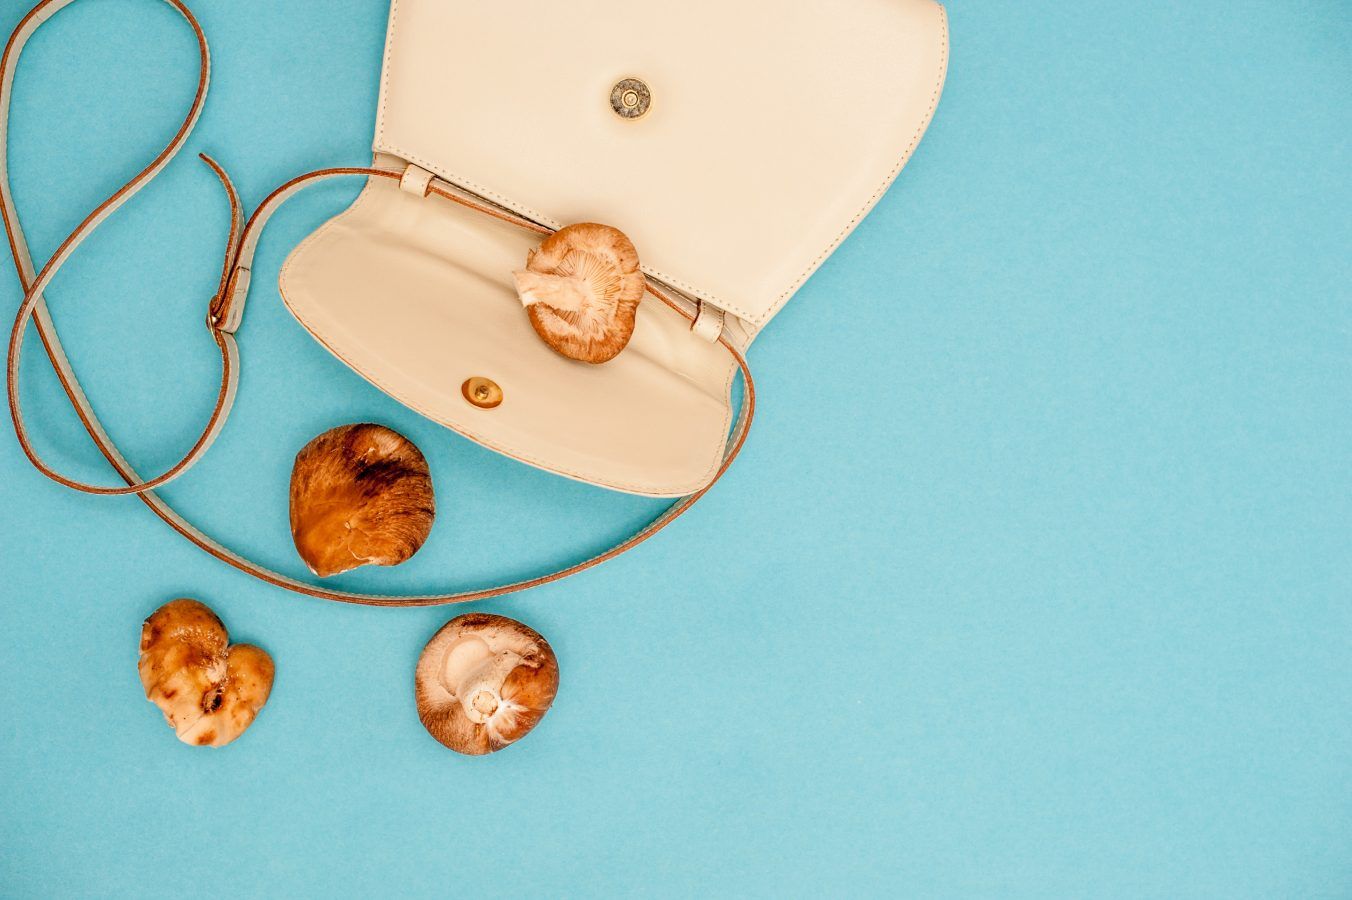 How mushrooms are changing the face of fashion